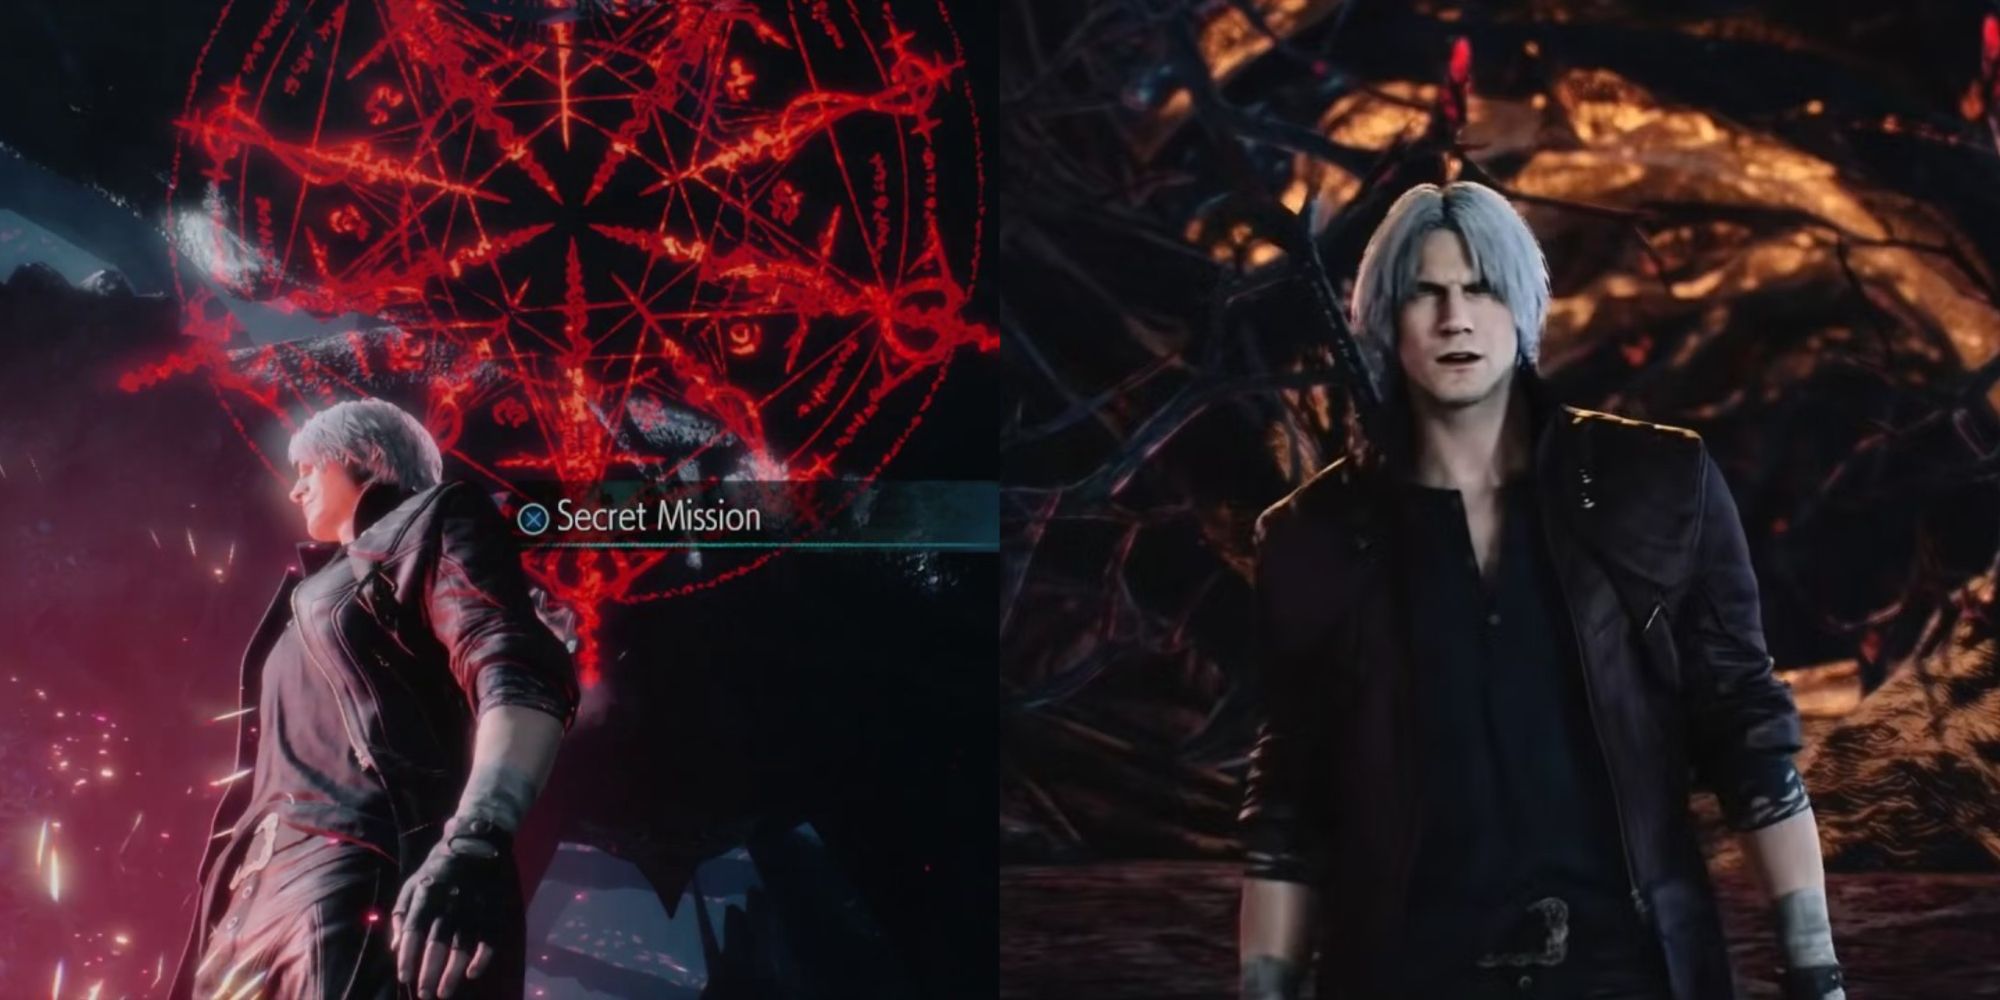 A collage showing Dante near the entrance to the secret mission on the left and Dante watching at something on the right.